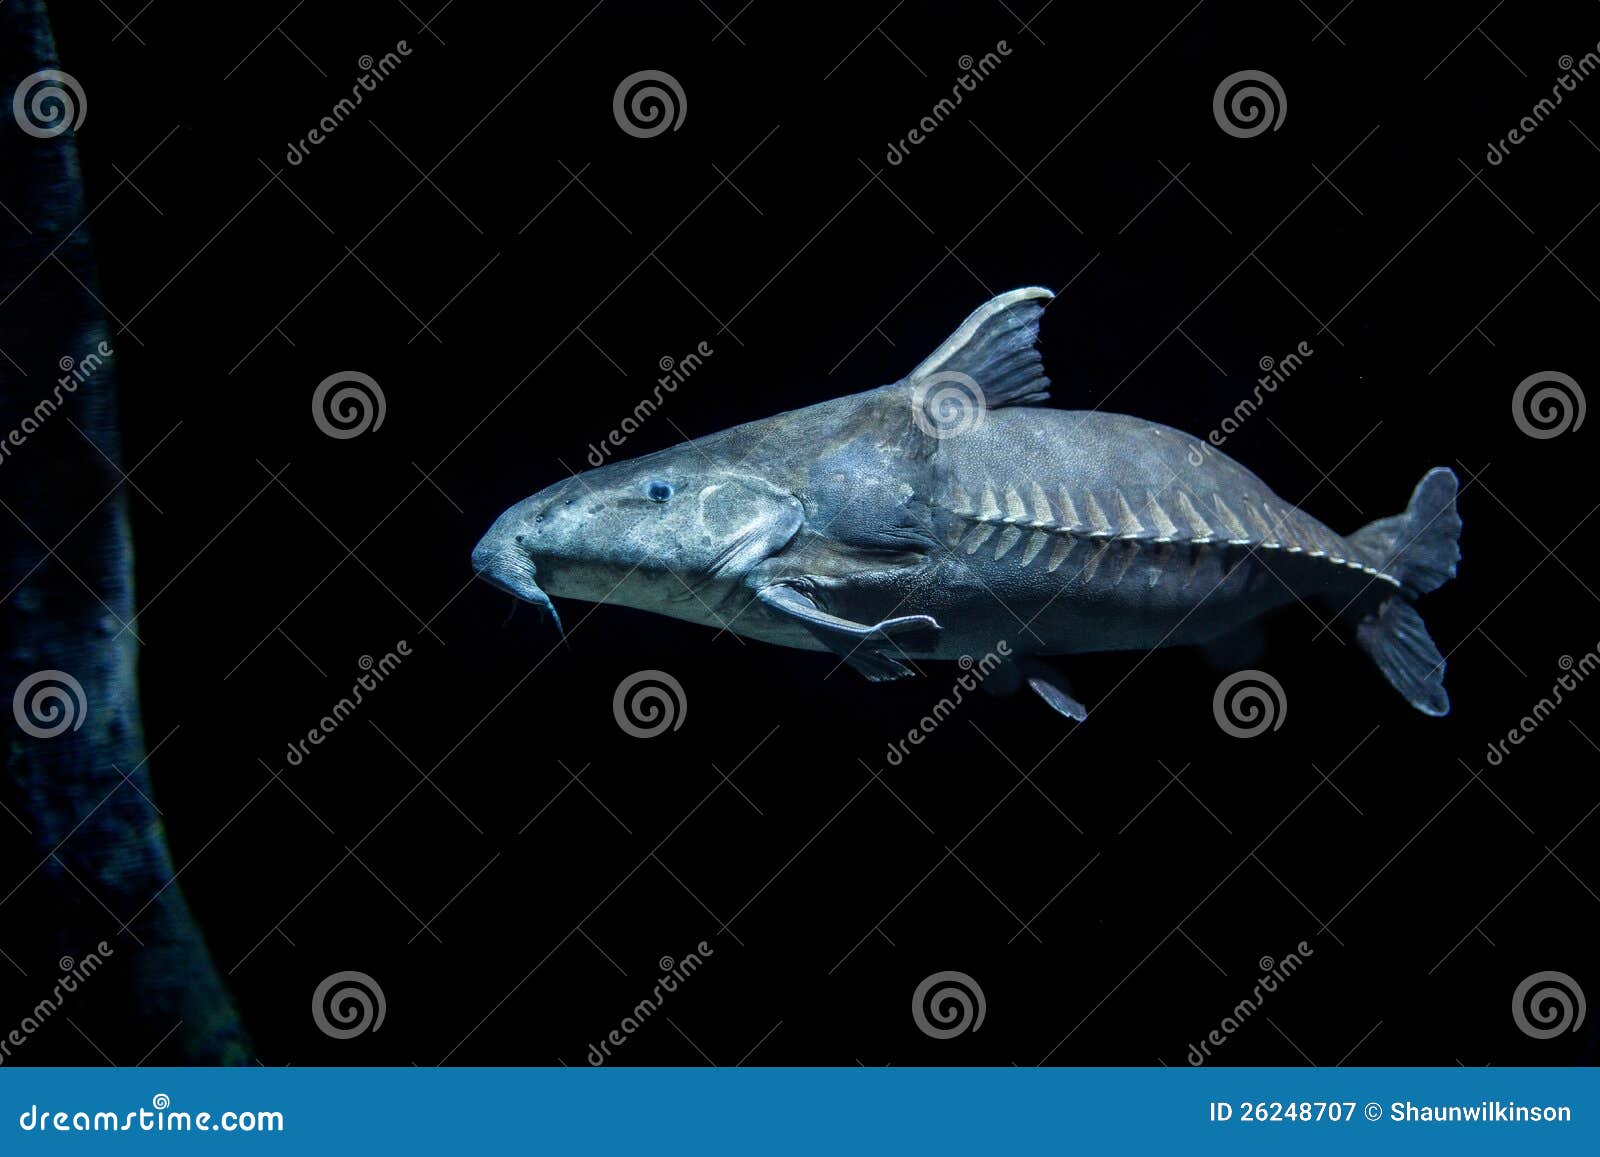 Ripsaw Catfish in Dark Water Stock Image - Image of large, south